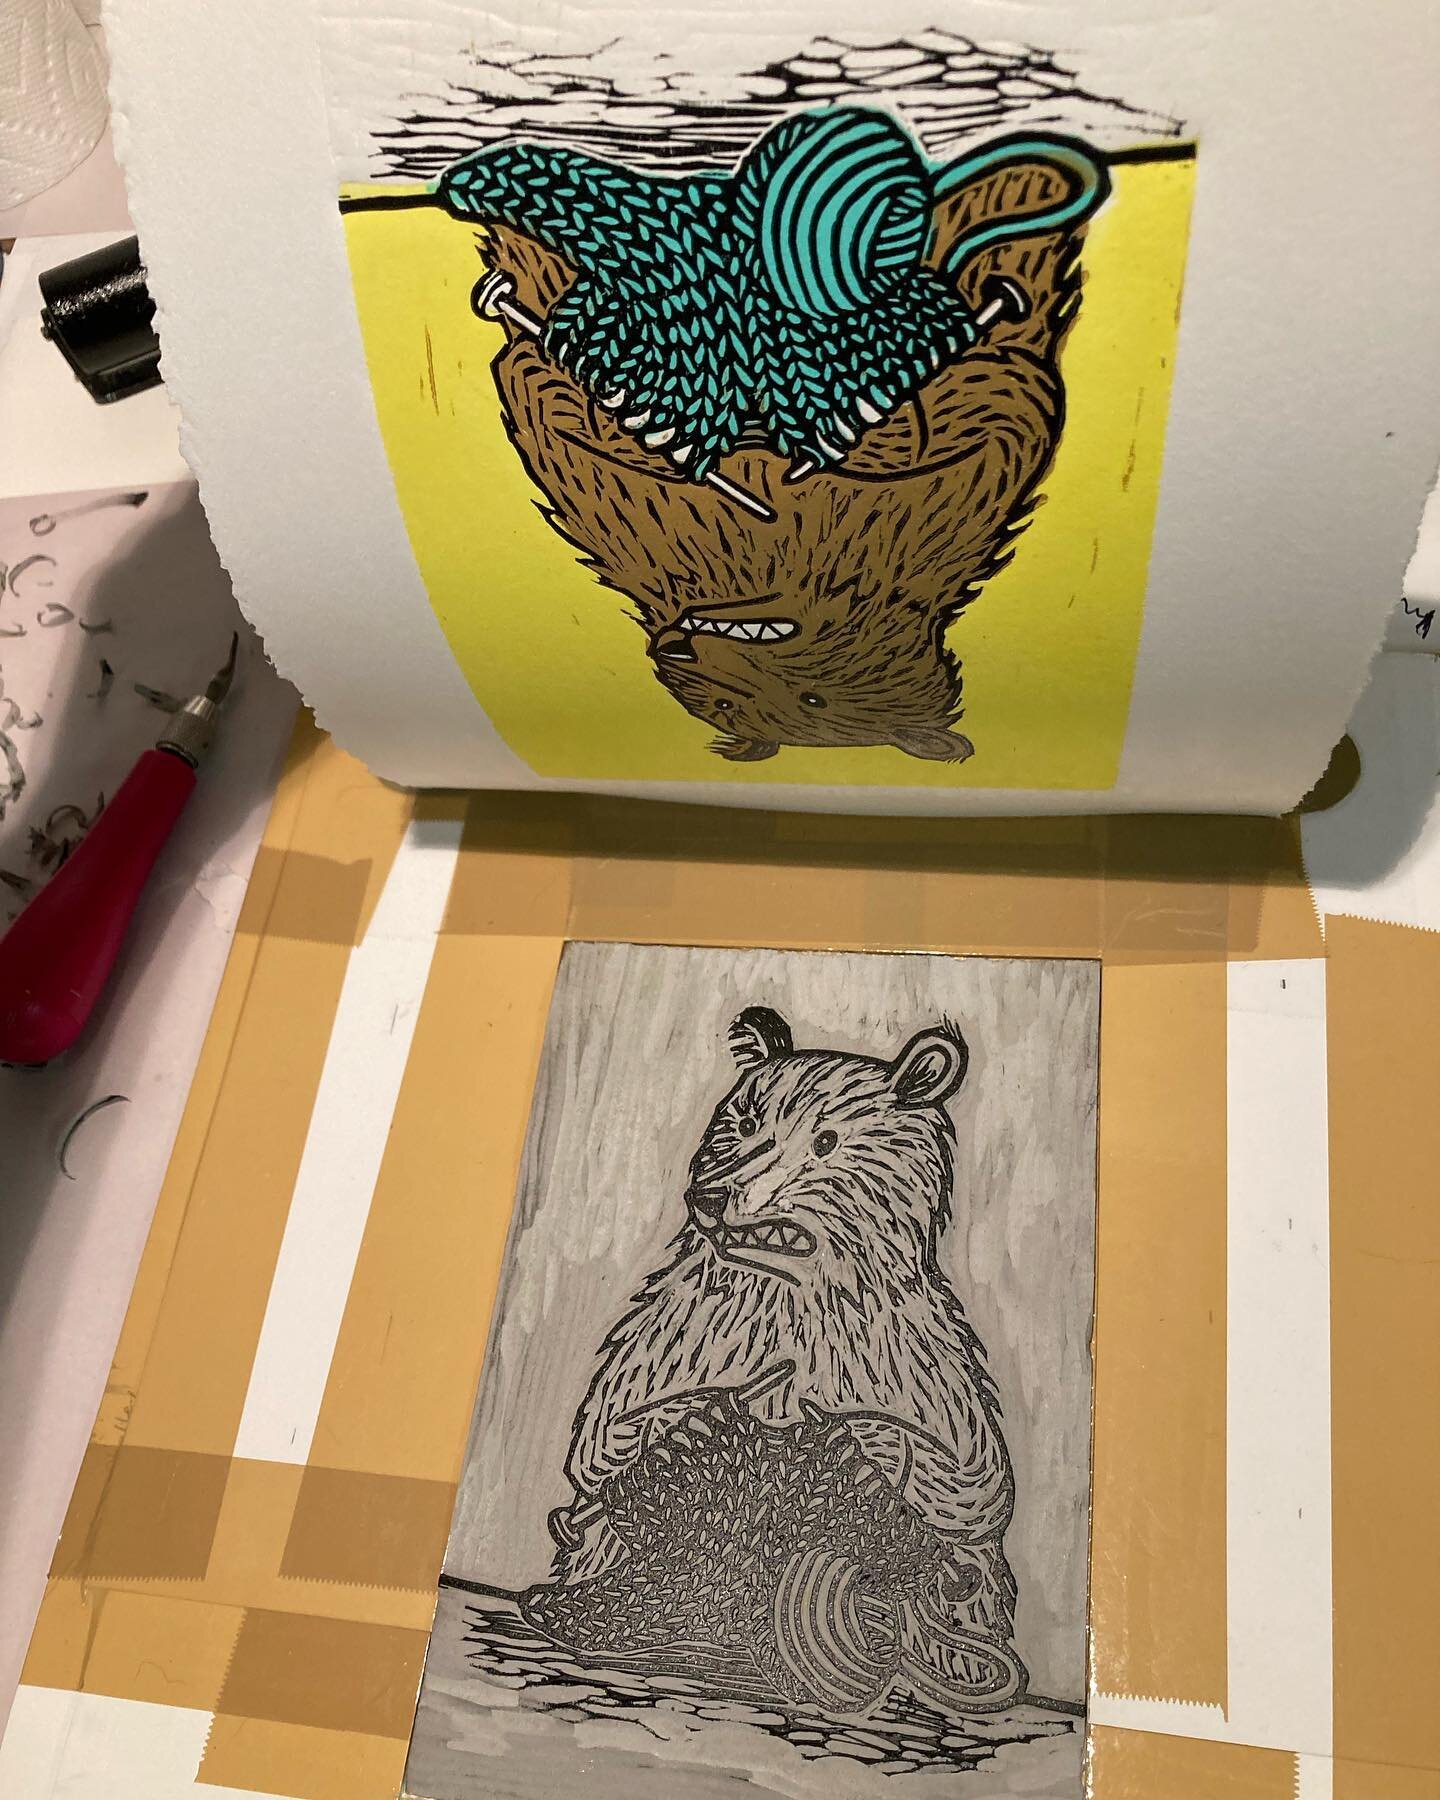 A little process story in a few photos.
Making more knitting bear linocuts. I carved 3 different plates of linoleum, one for each color. Well, I used the same Lino for the yellow/ aqua plate, with careful ink rolling. Yellow/aqua plate first, brown s